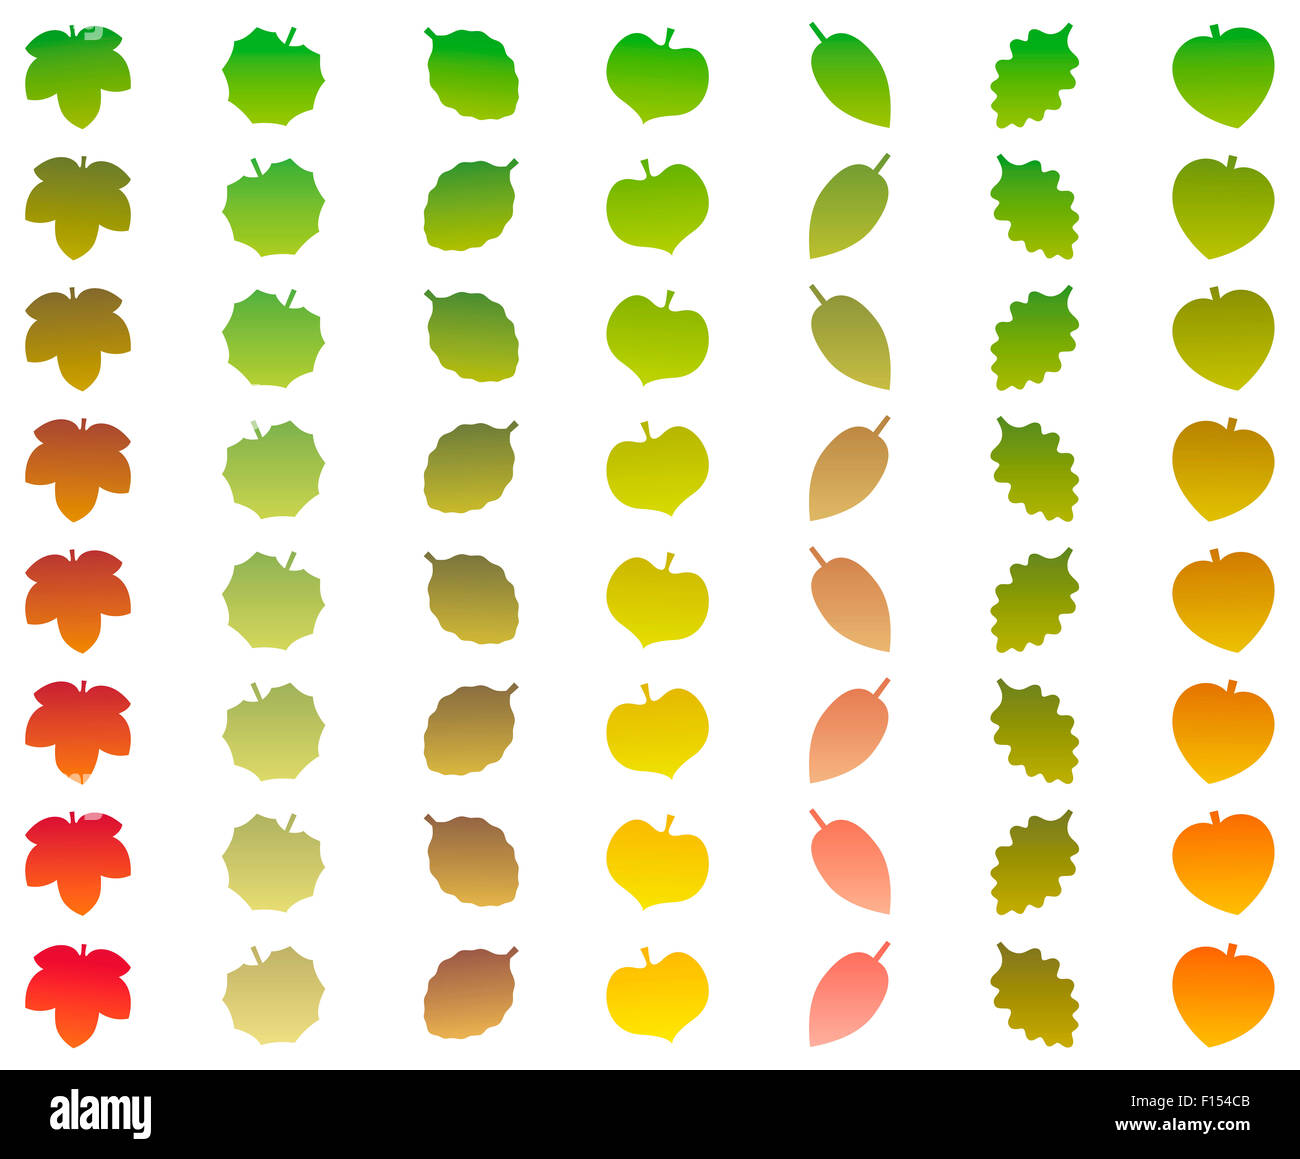 Leaves that change from green color into autumn colors while falling off. Illustration on white background. Stock Photo